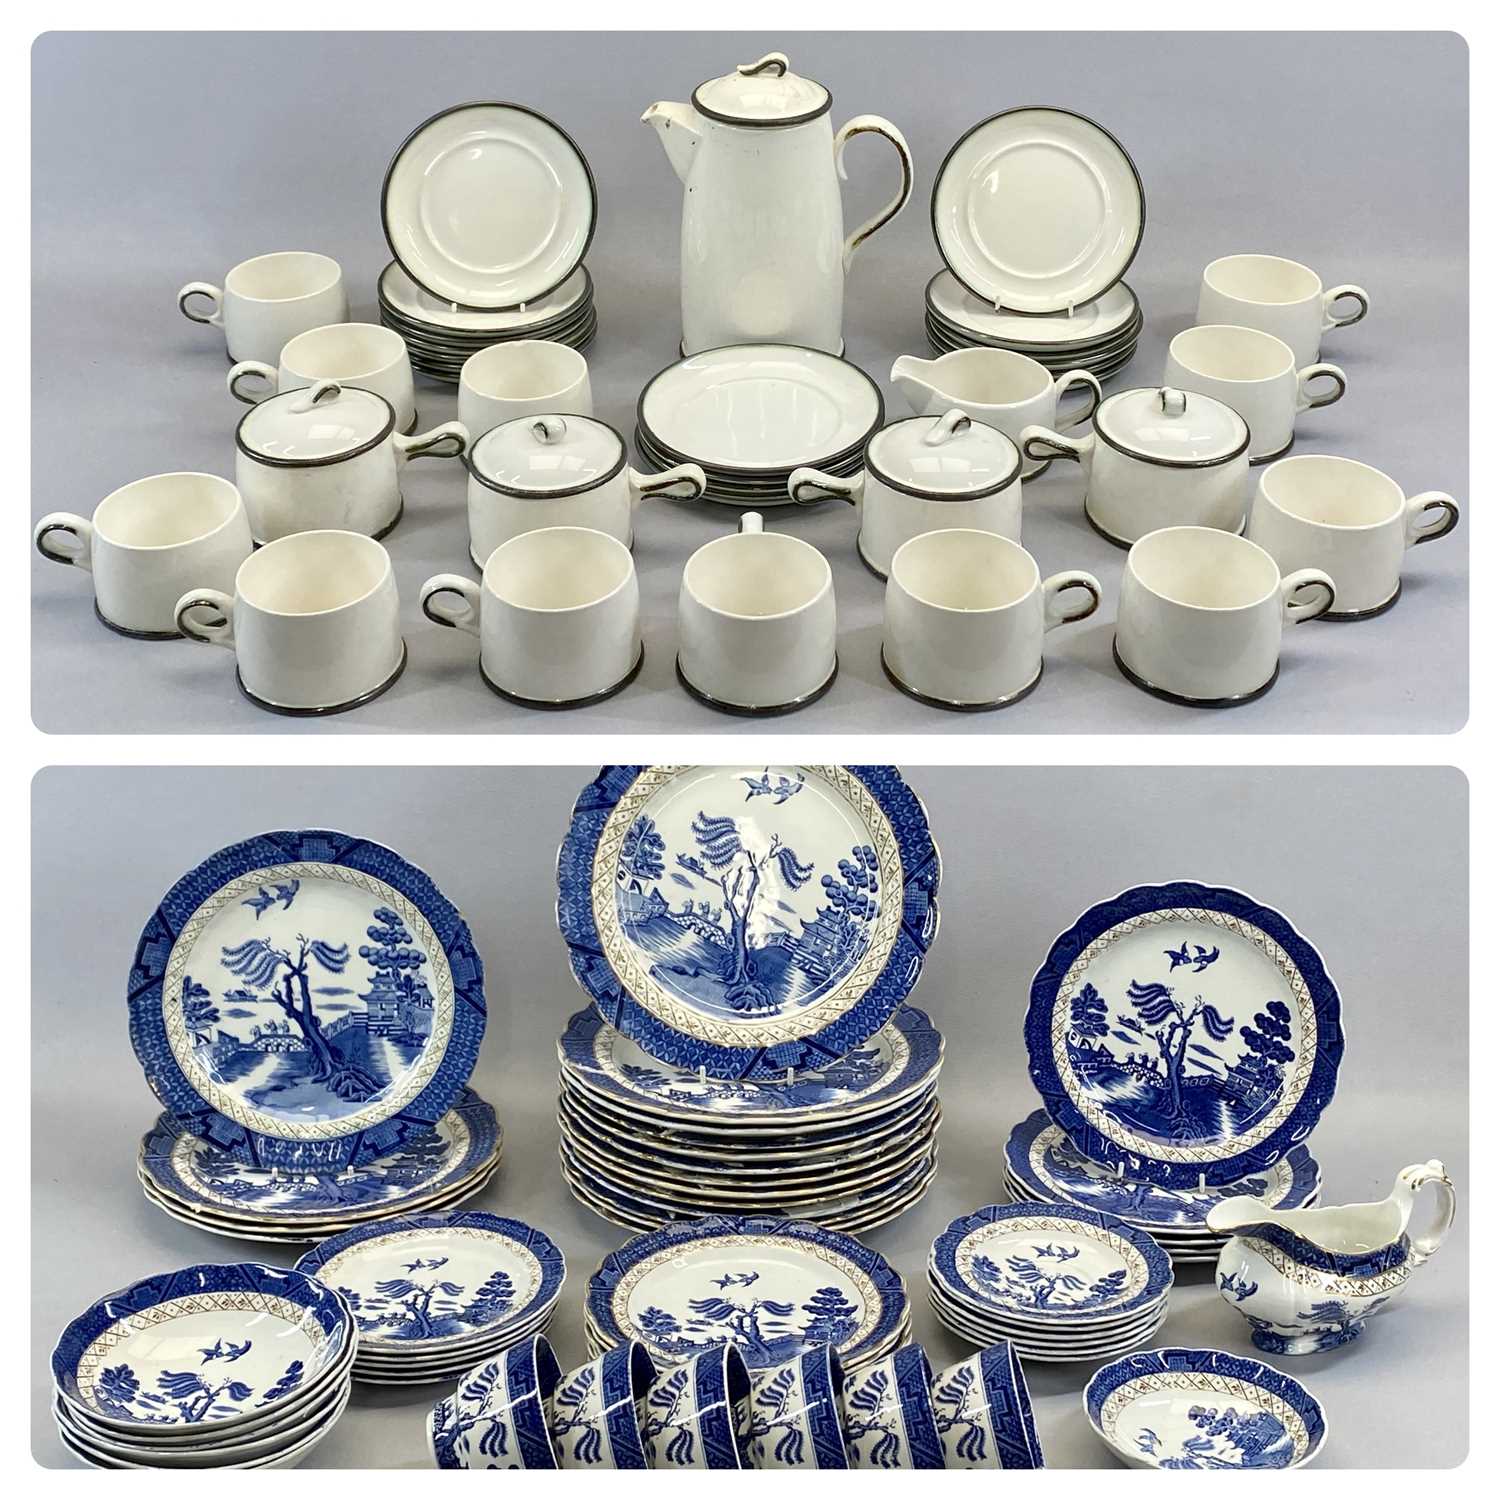 WEDGWOOD 'ARCTIC' PATTERN SERVICE, APPROX. 35 PIECES, and a Booths 'Real Old Willow' pattern